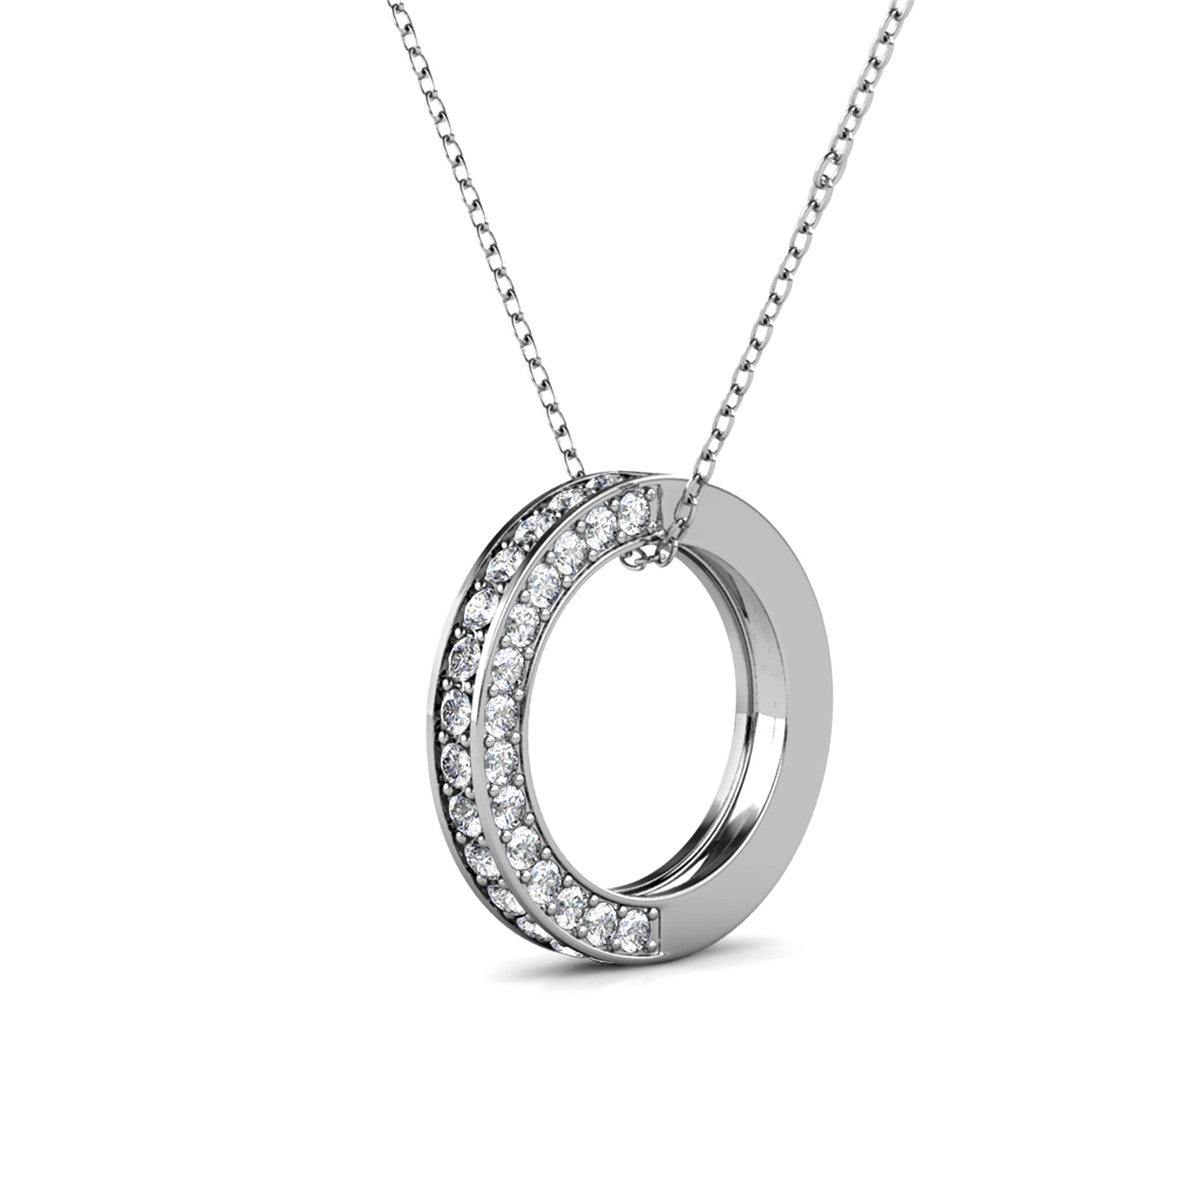 Vivianna 18k White Gold Plated Circle Pendant Necklace with Crystals